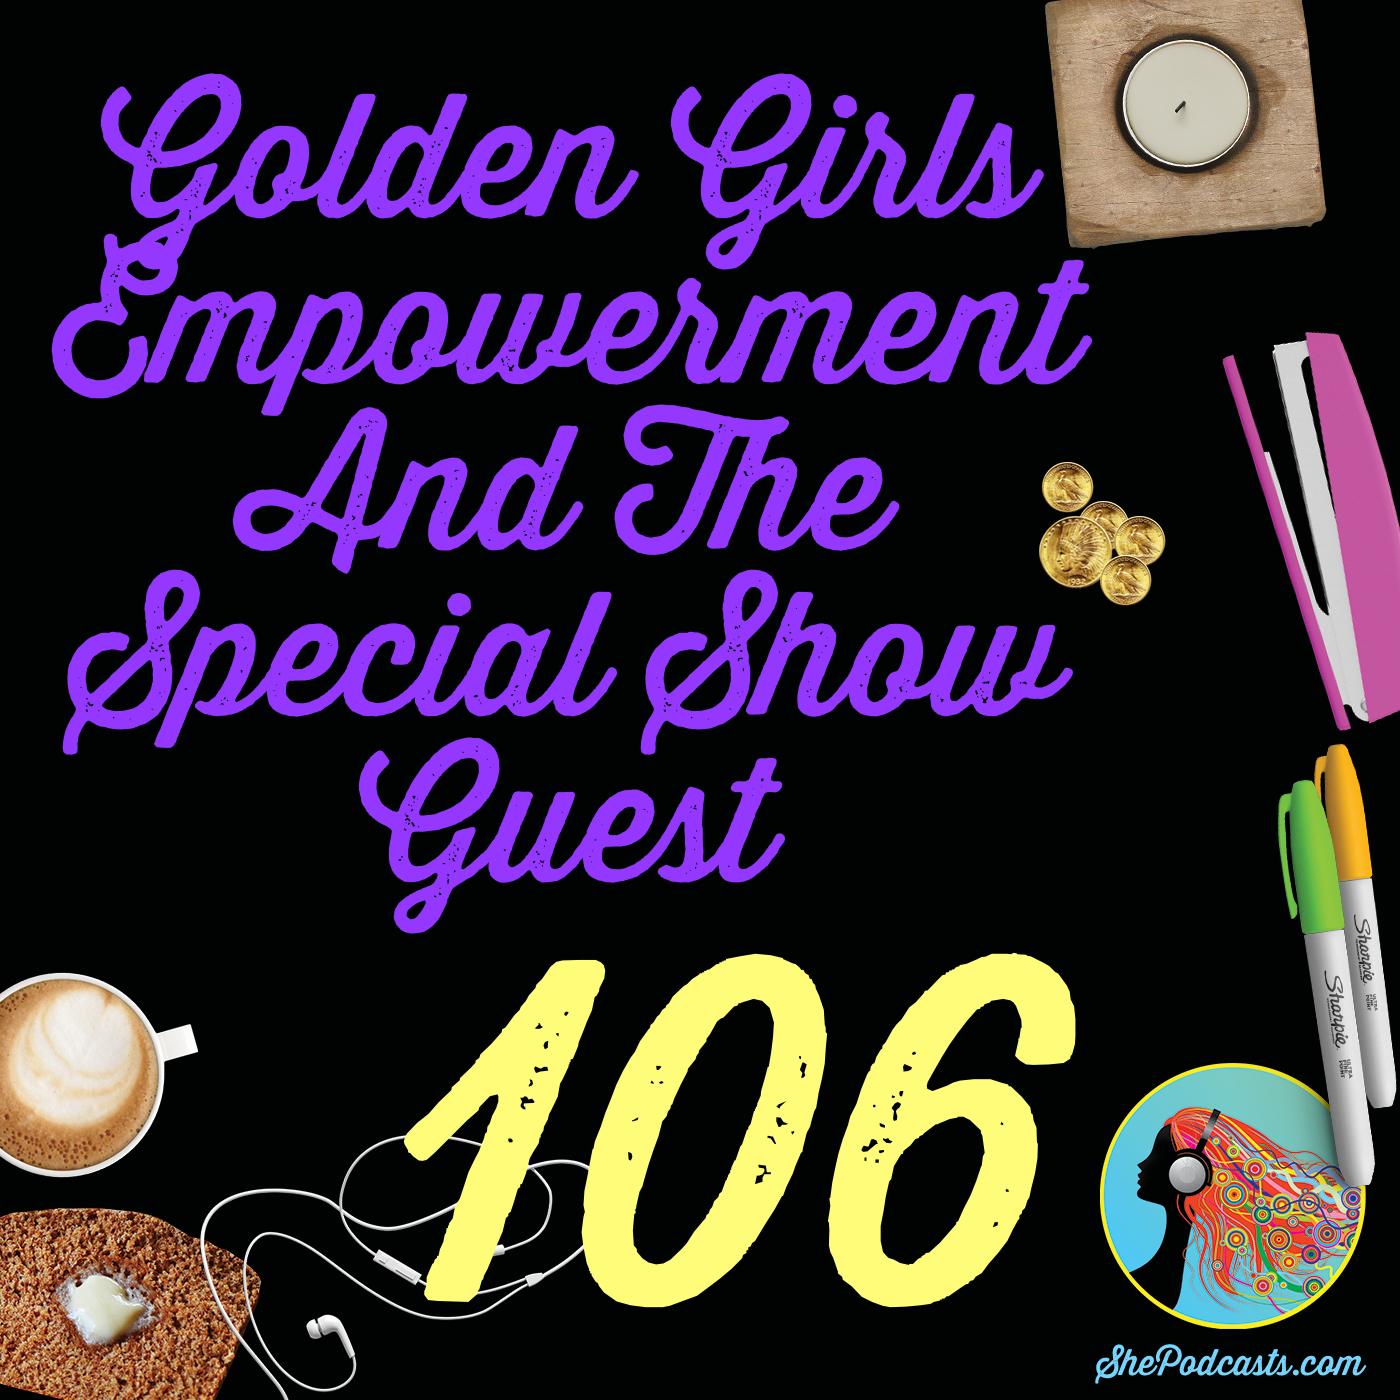 106 Golden Girls Empowerment And The Special Show Guest